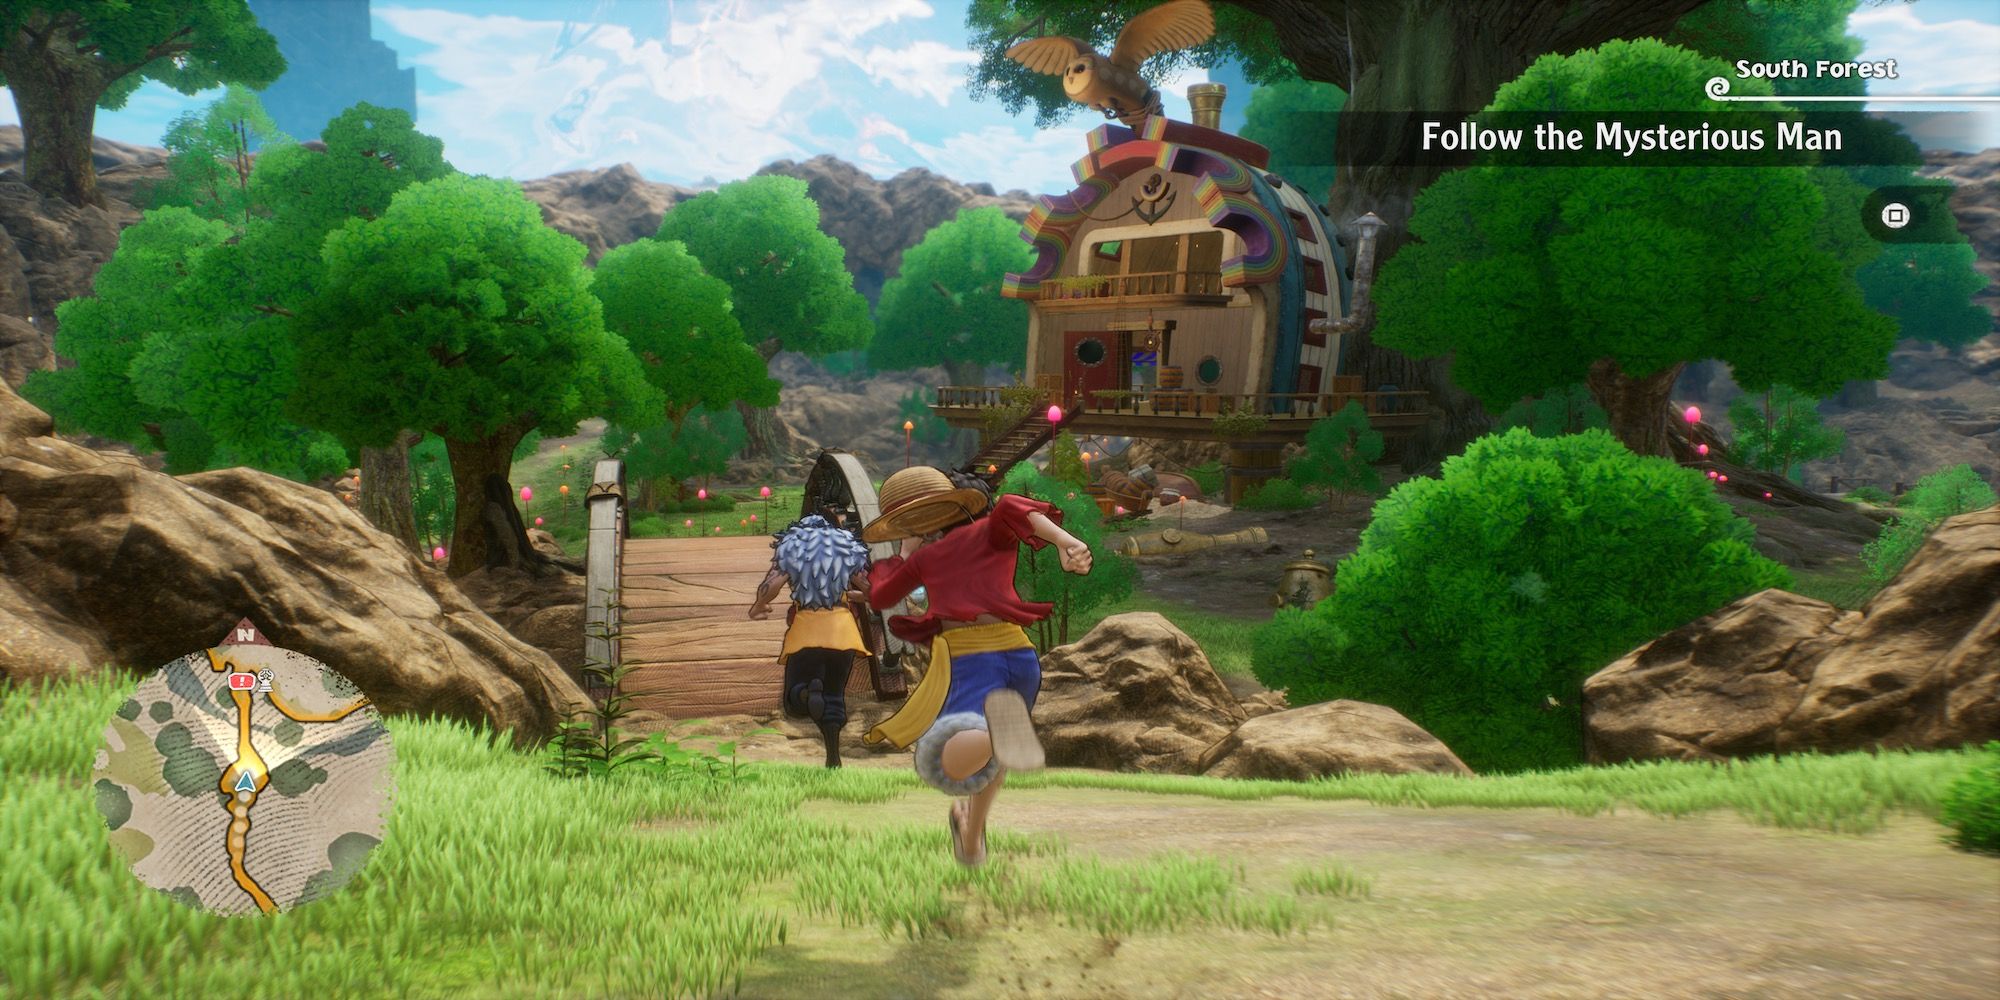 Exploring the world in One Piece Odyssey